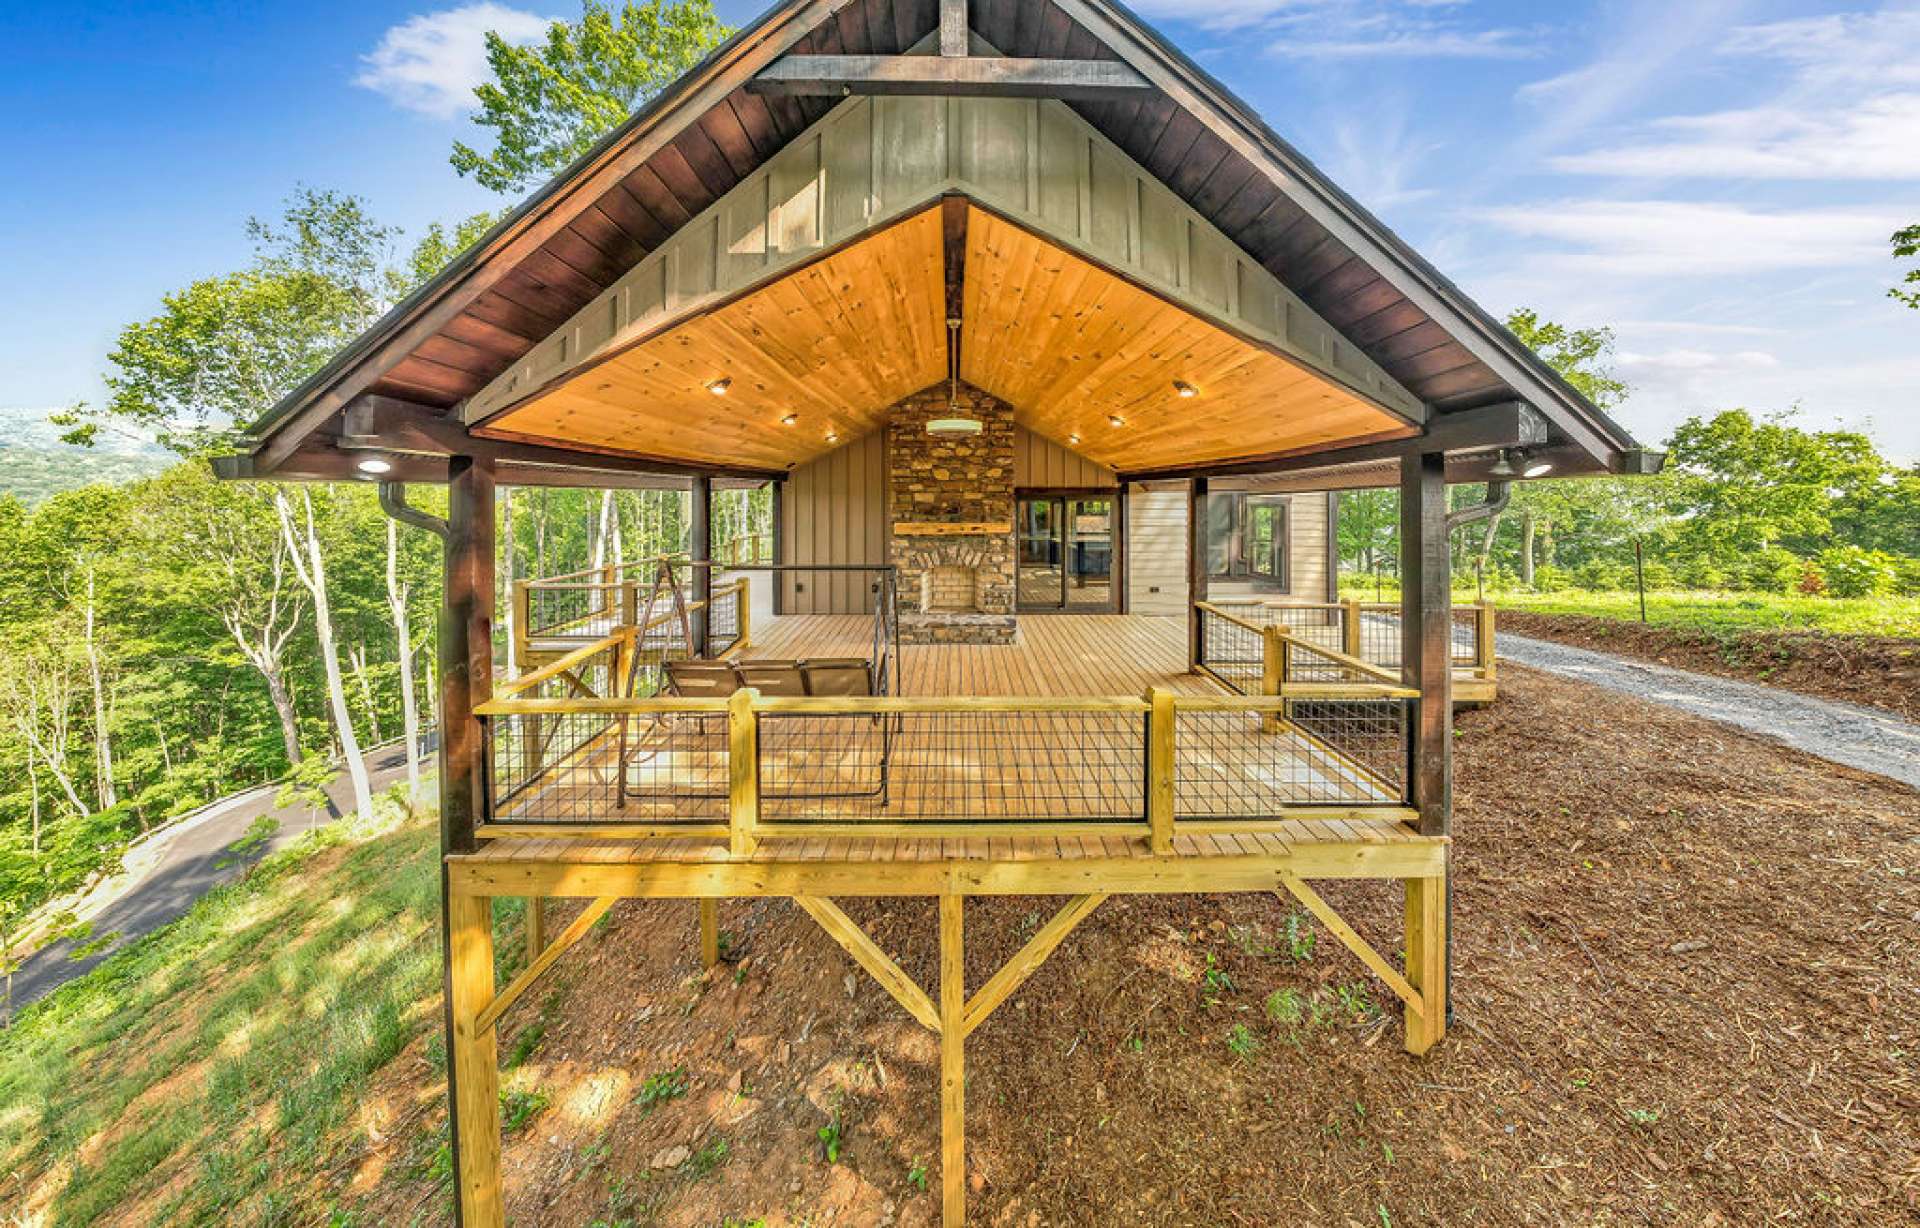 Enjoy the views and fresh mountain air from this spacious 400 sf covered deck which includes an outdoor fireplace.